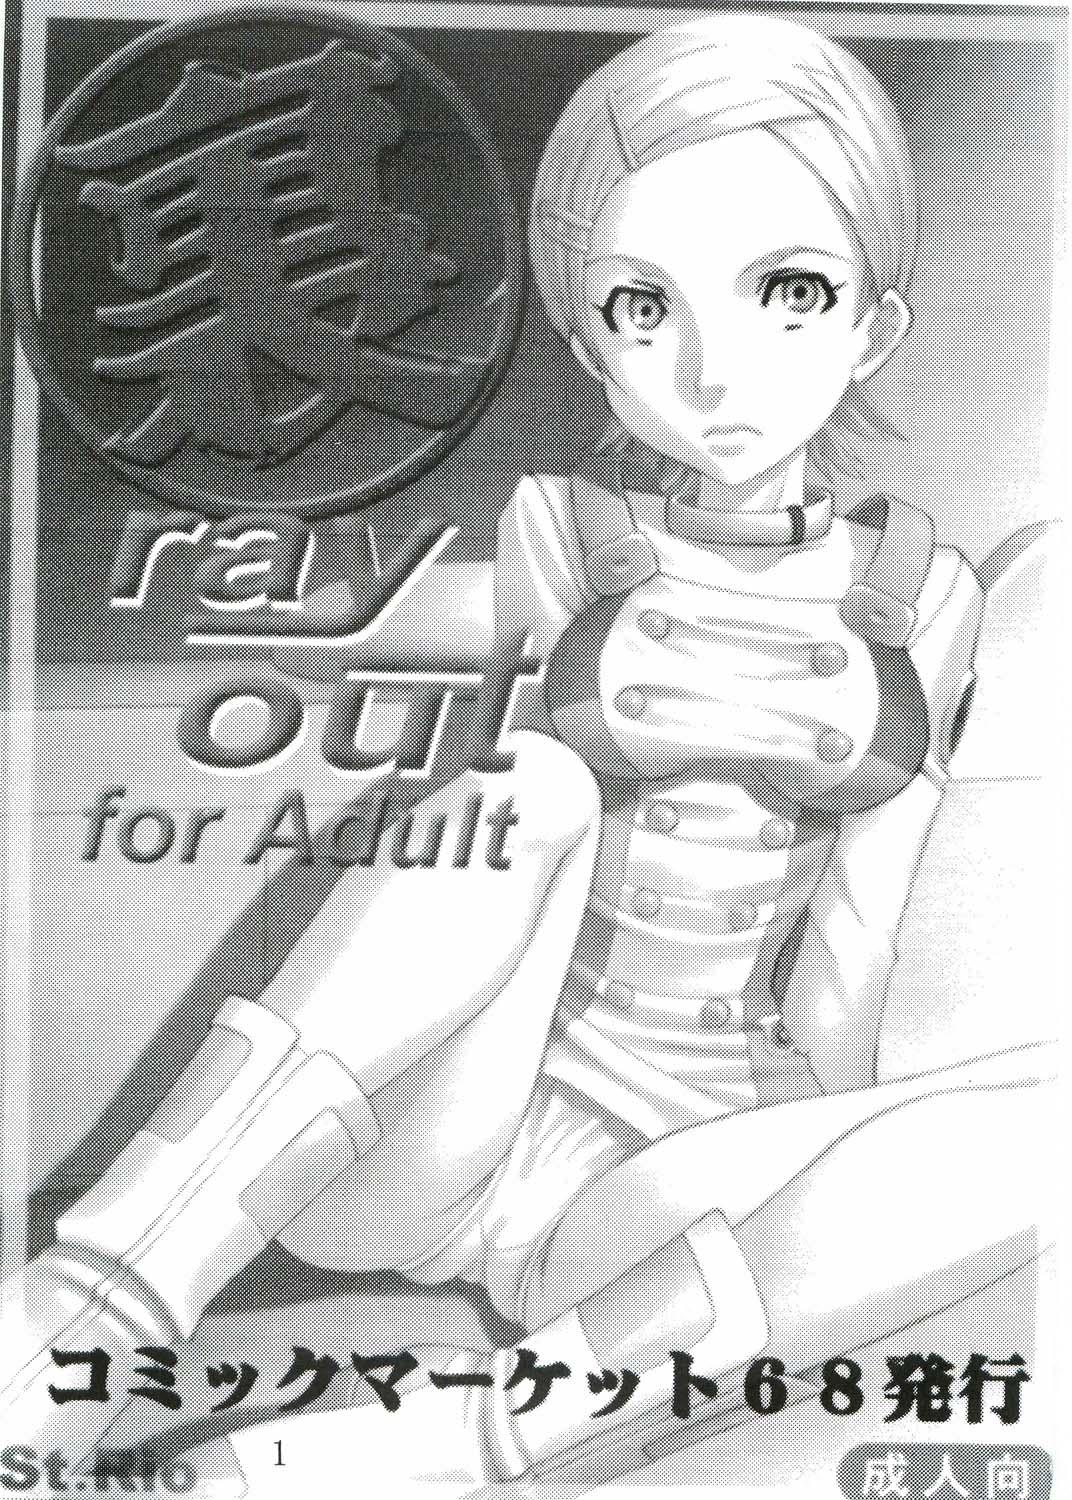 Finger Ura ray-out - Eureka 7 Lolicon - Page 2